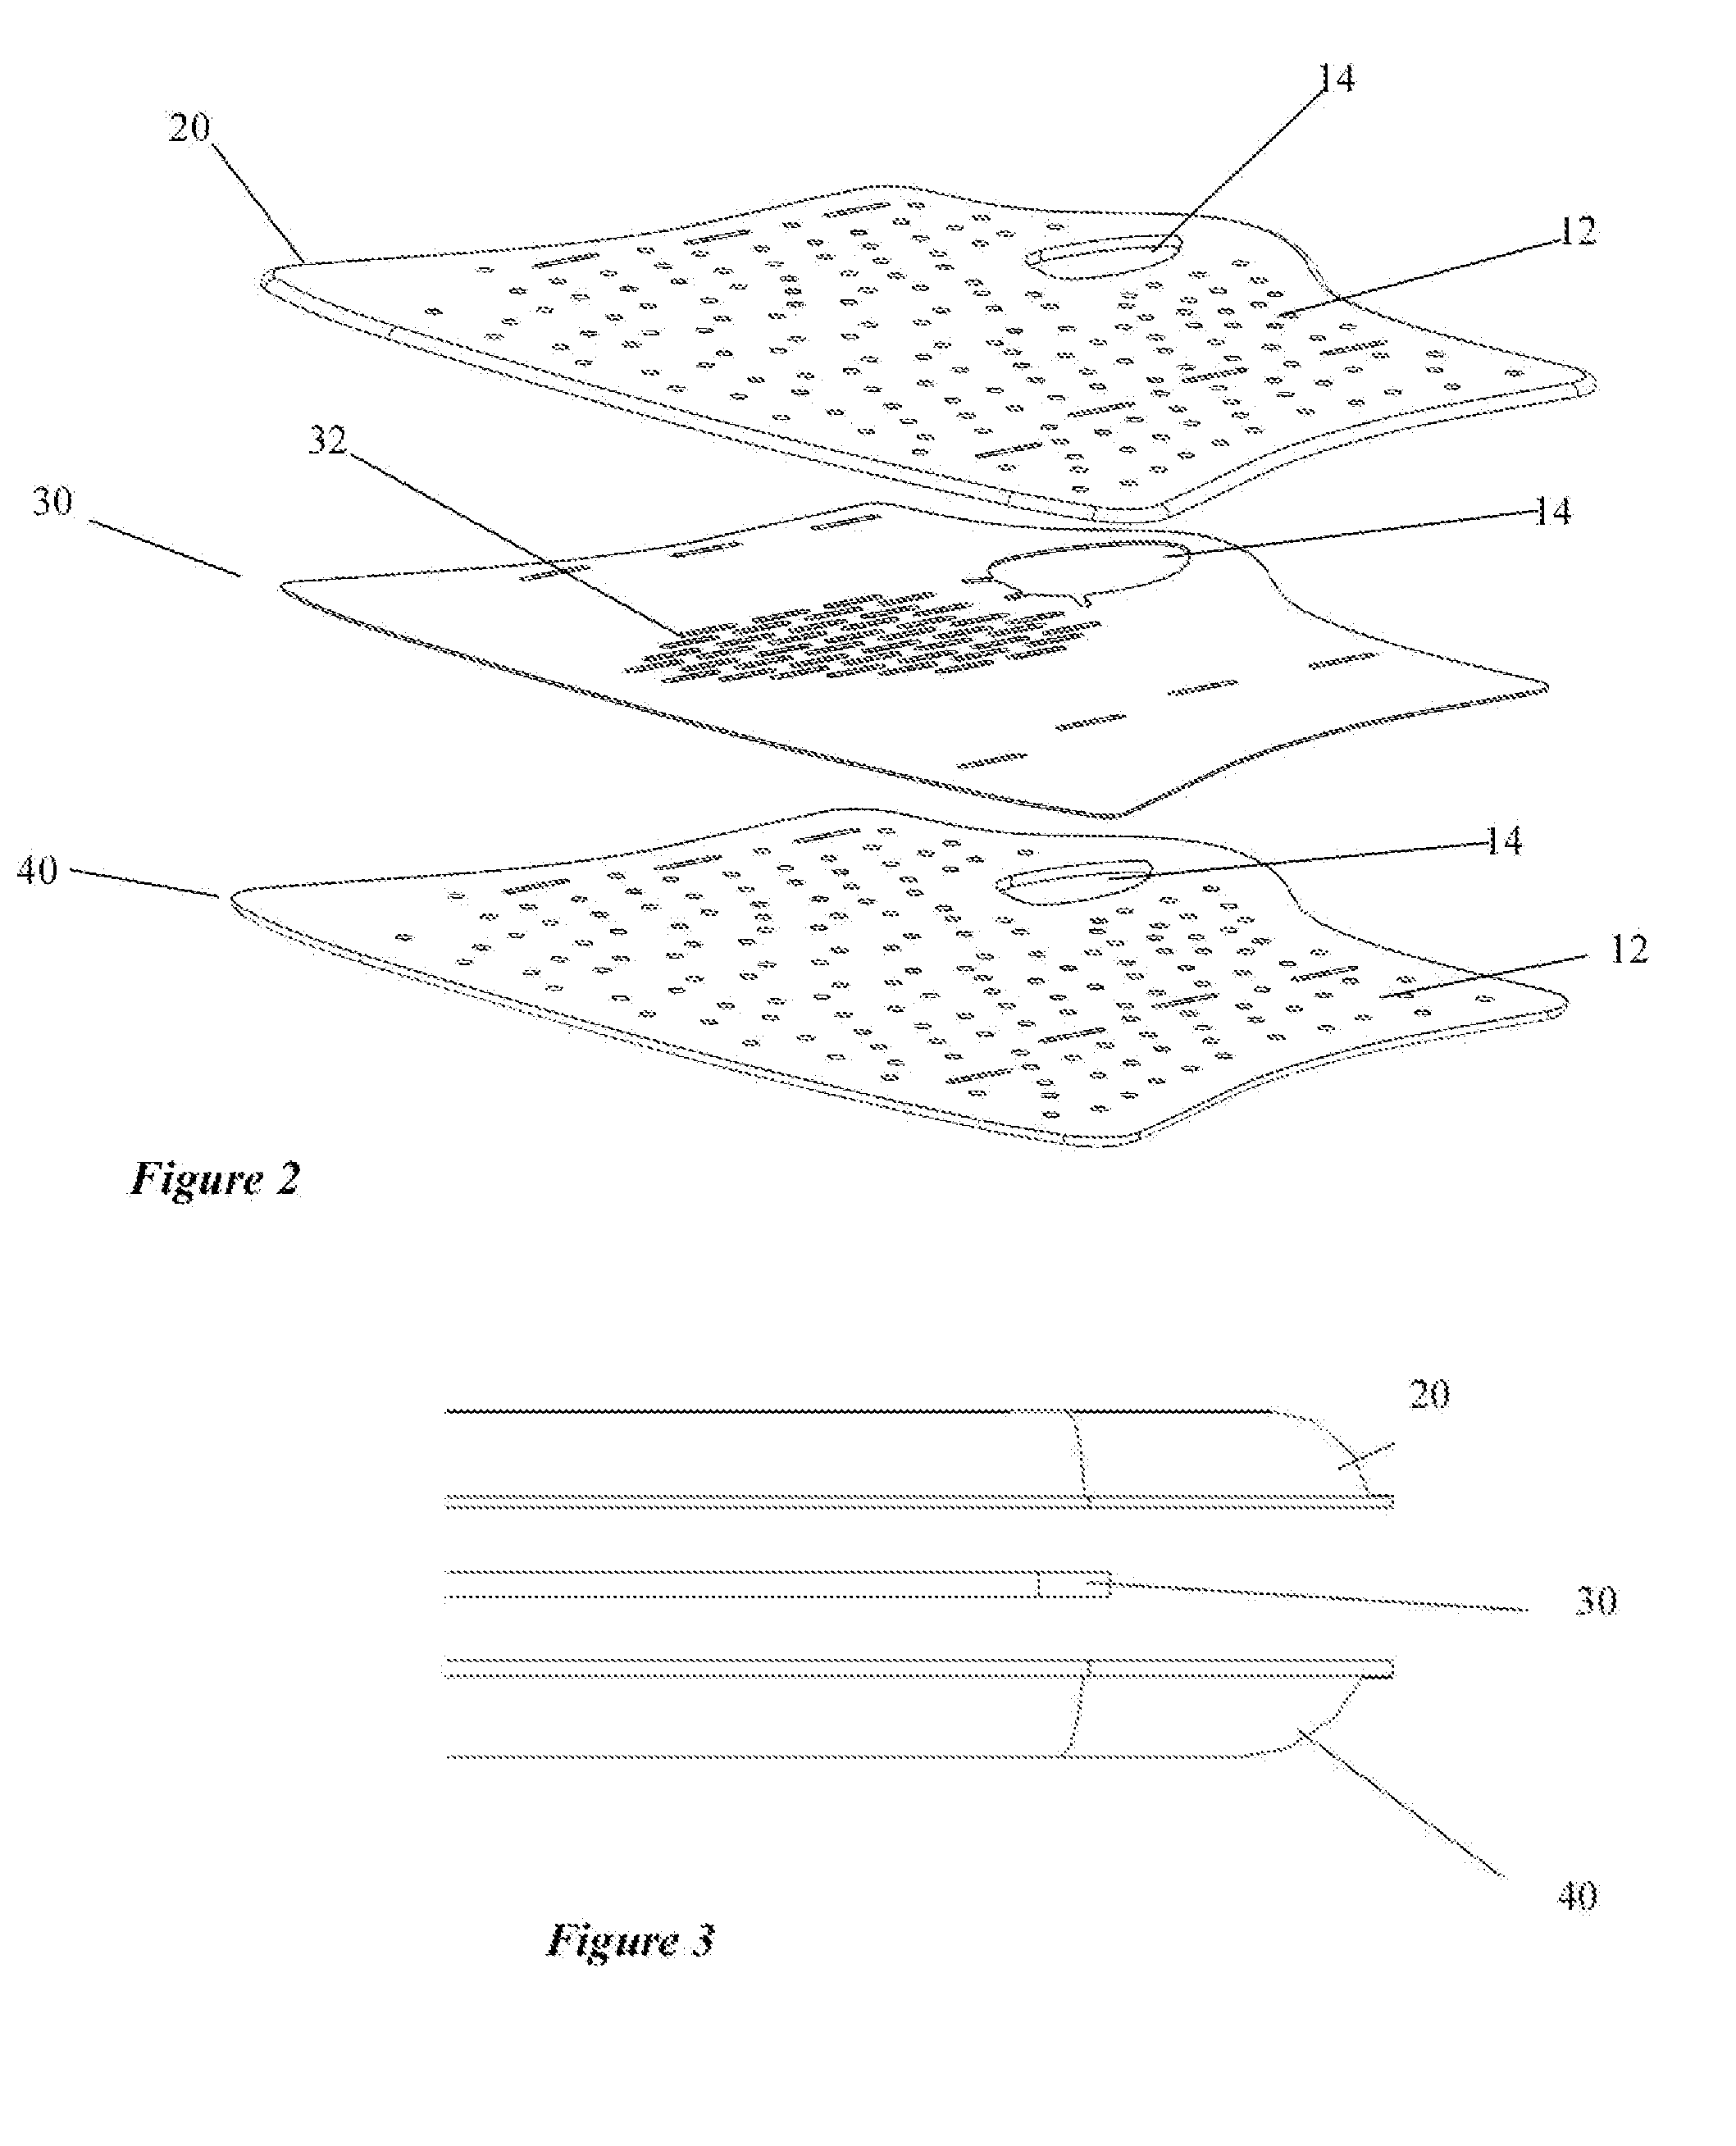 Orthopedic System for Immobilizing and Supporting Body Parts